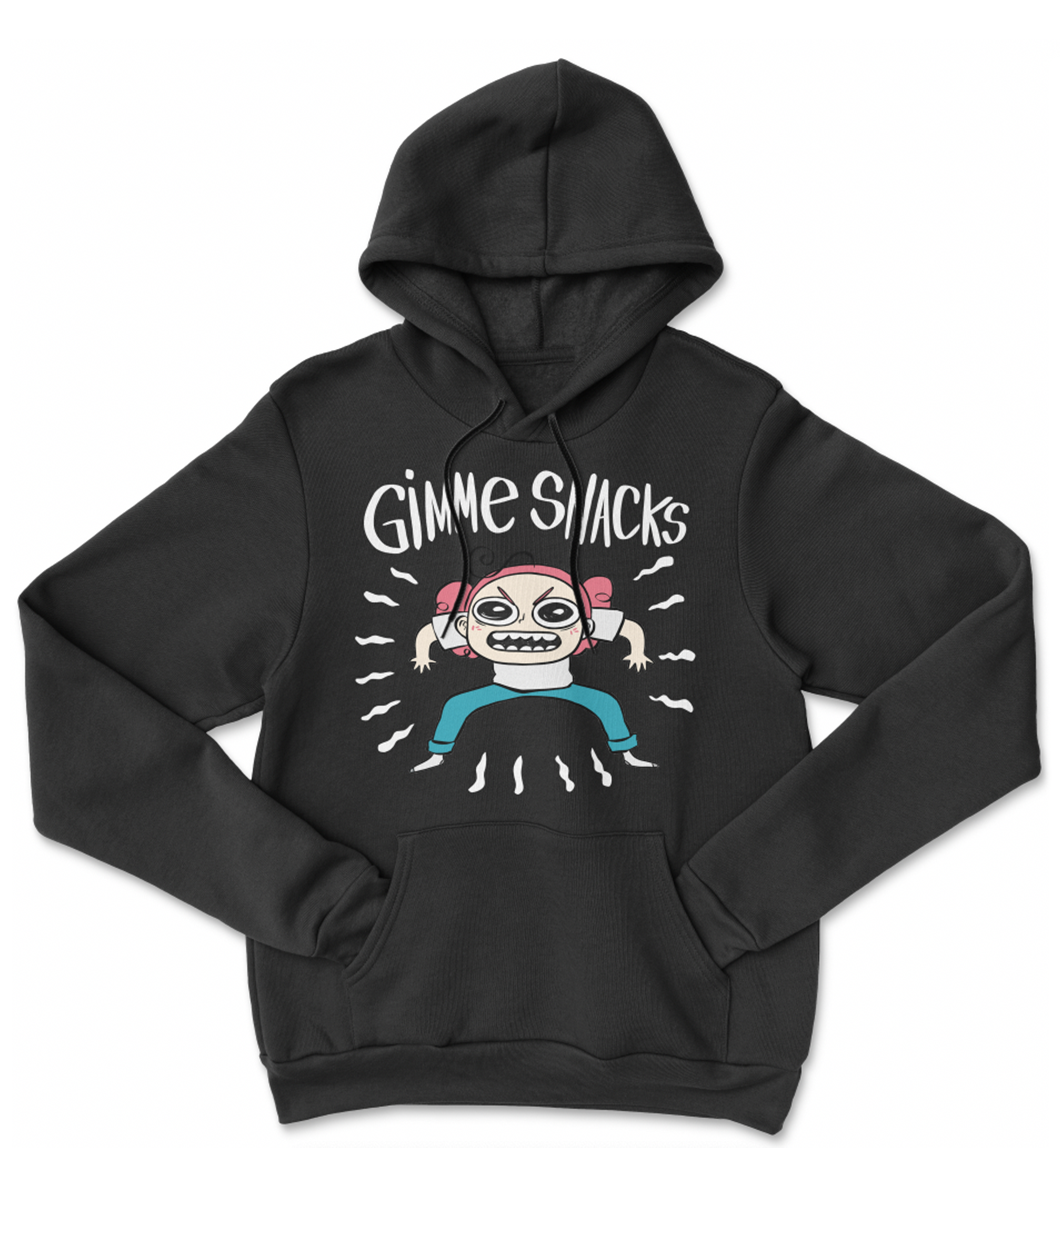 A black hoodie with the What's Up Beanie character looking angry with the text 